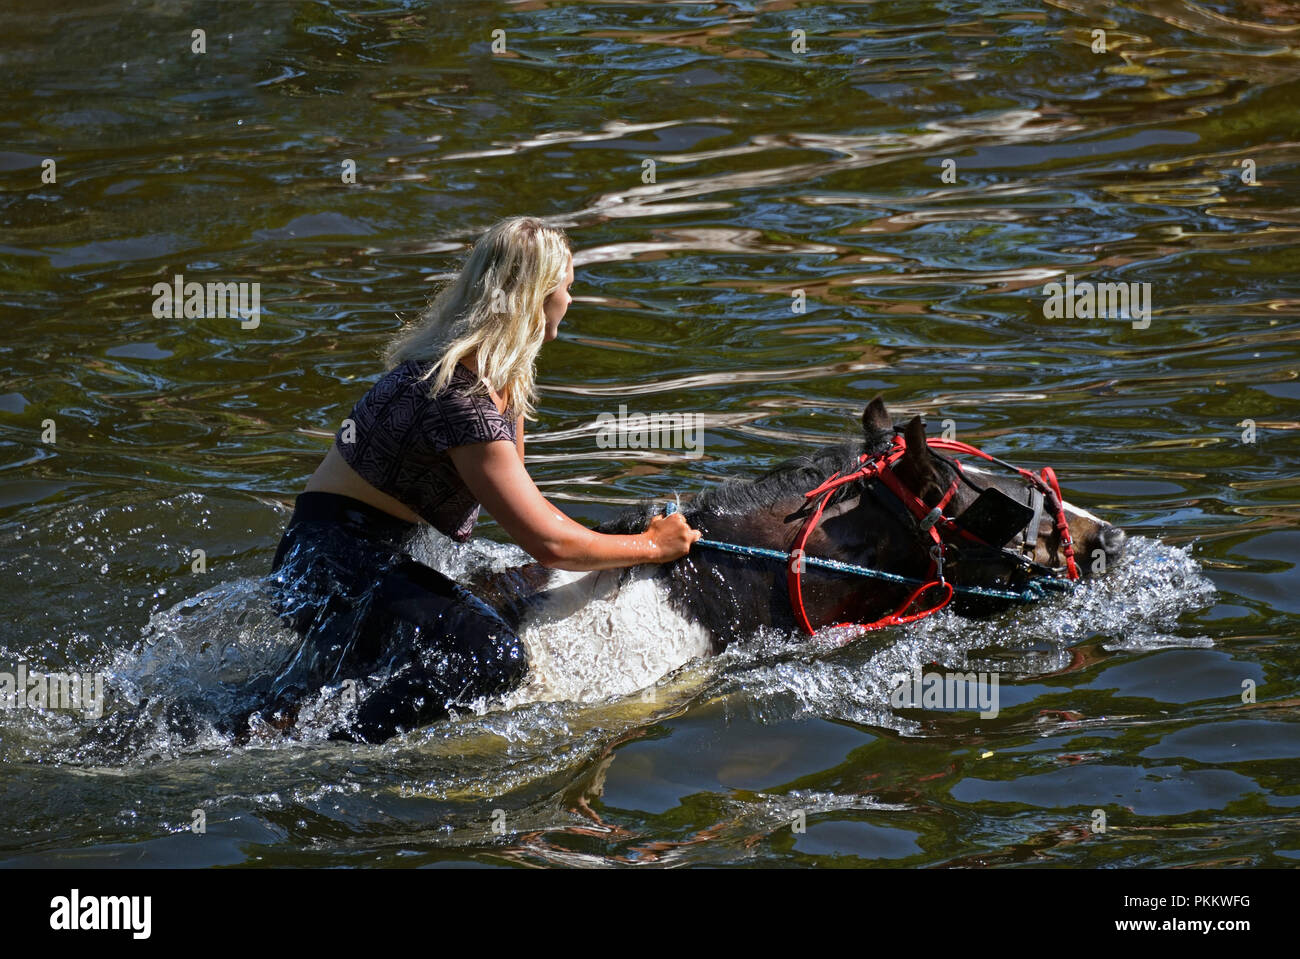 Gypsy traveller girl riding horse in River Eden. Appleby Horse Fair 2018. Appleby-in-Westmorland, Cumbria, England, United Kingdom, Europe. Stock Photo